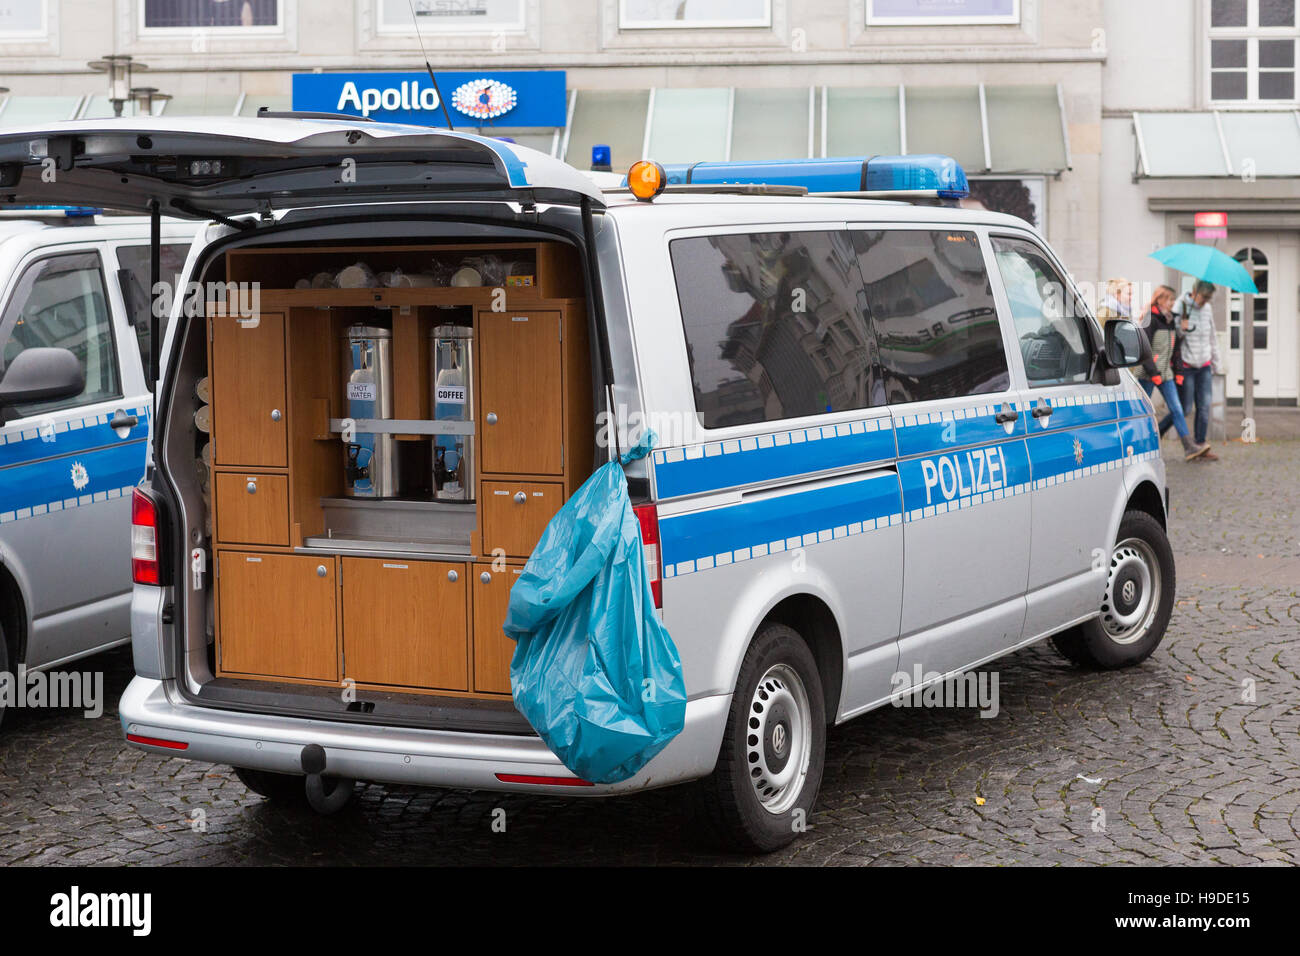 A mobile cafe in the back of a German police vehicle Stock Photo